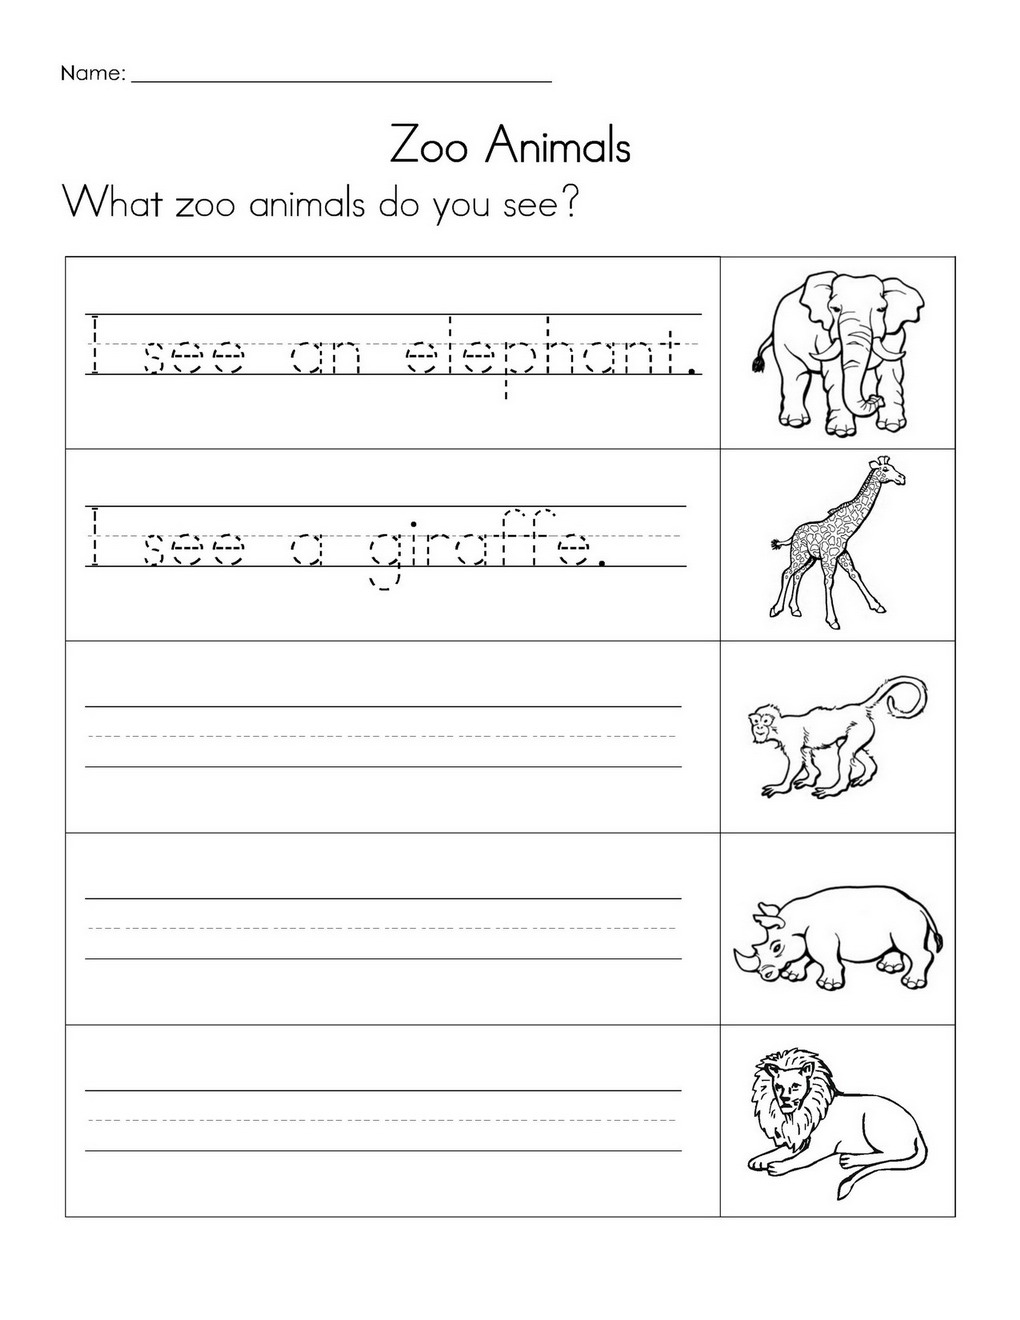 11 Best Images of Zoo Animal Worksheets - Zoo Animals Worksheets ...